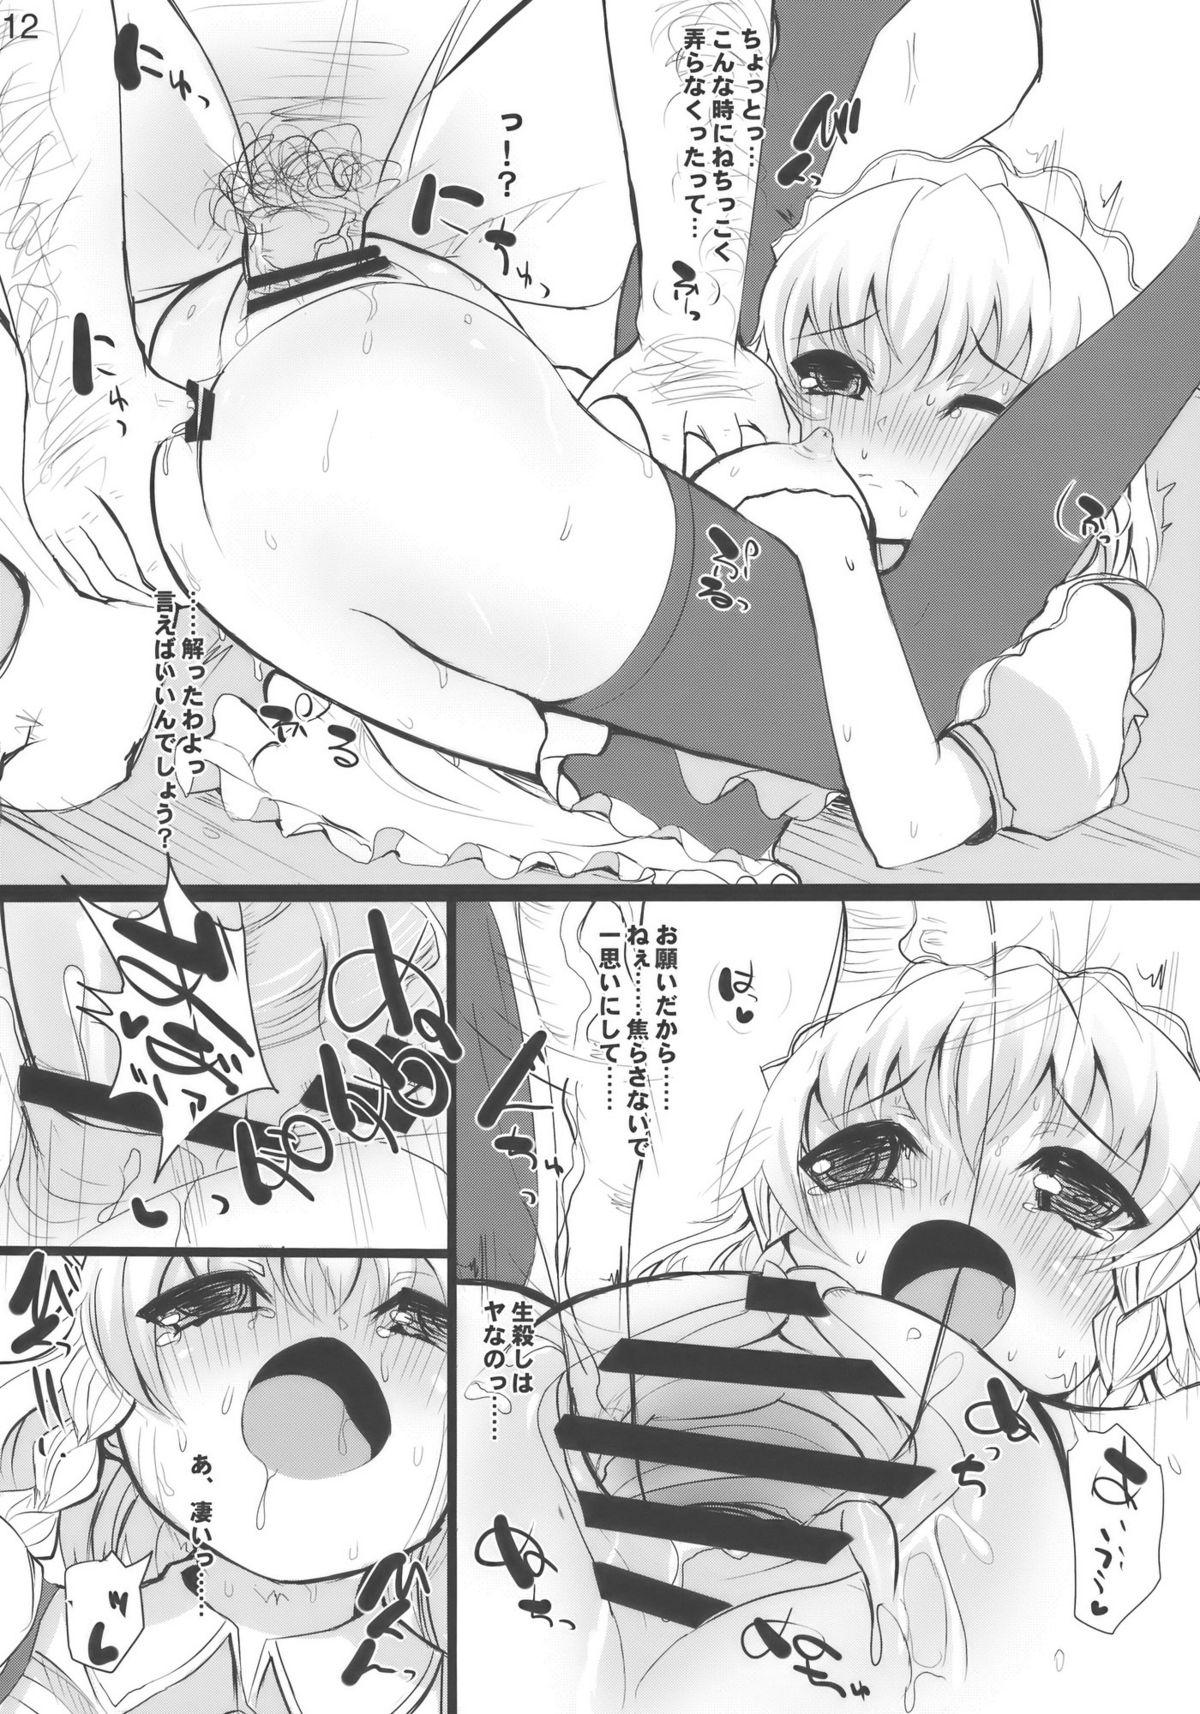 New Feed me with your Kiss - Touhou project Putinha - Page 12